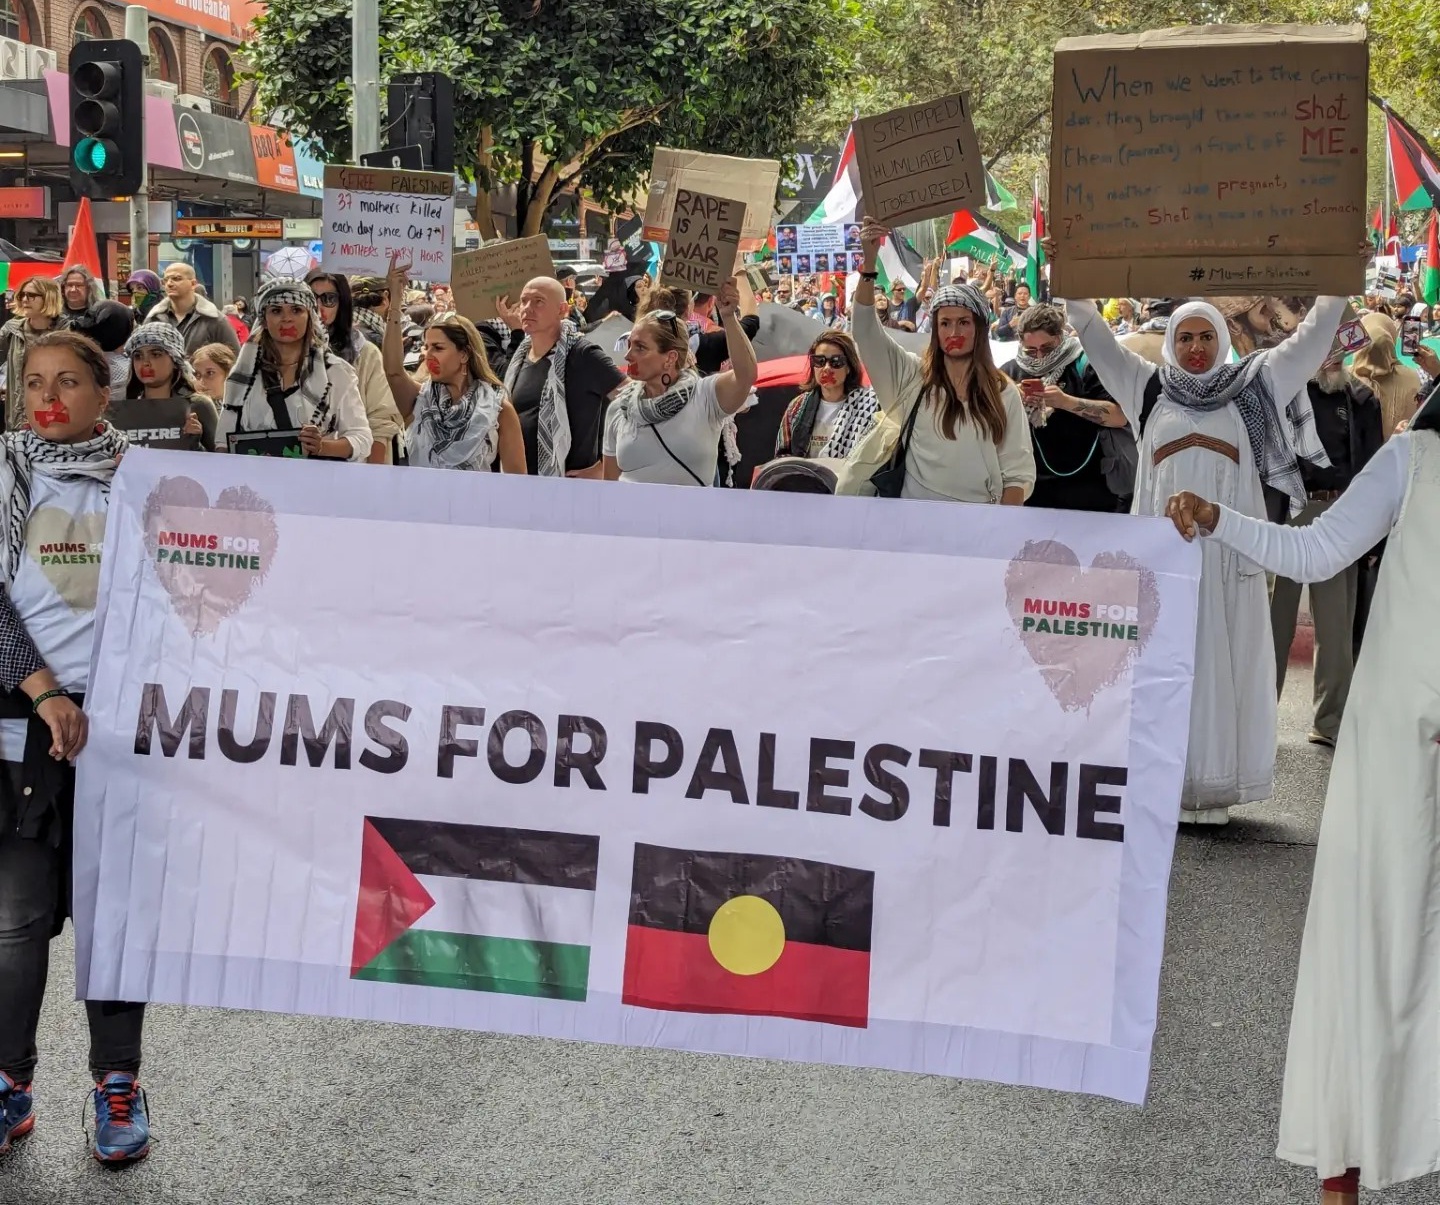 Mums for Palestine in Naarm/Melbourne, April 7